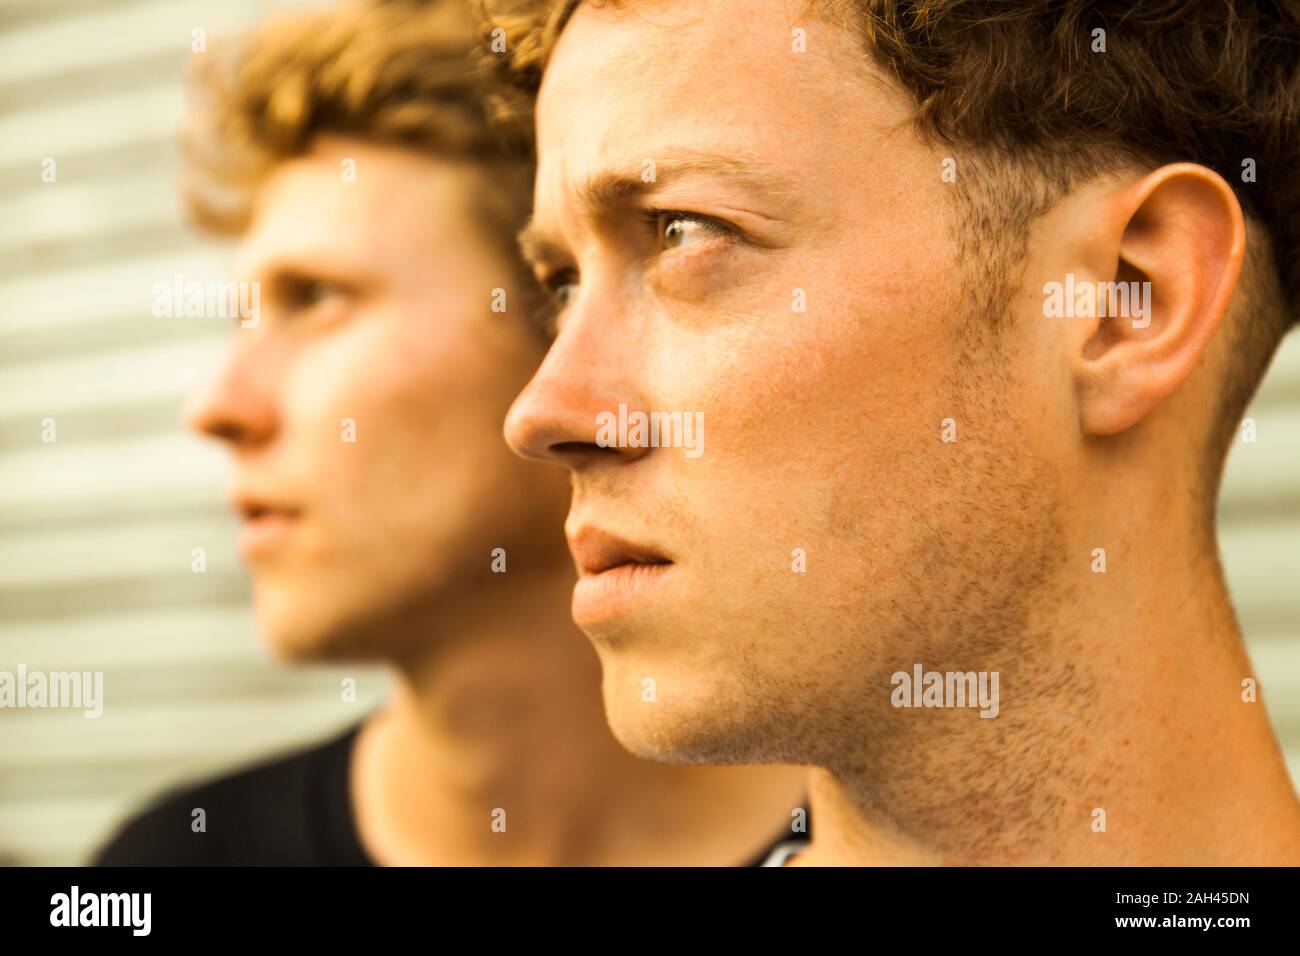 Portrait of strawberry blonde young men Stock Photo